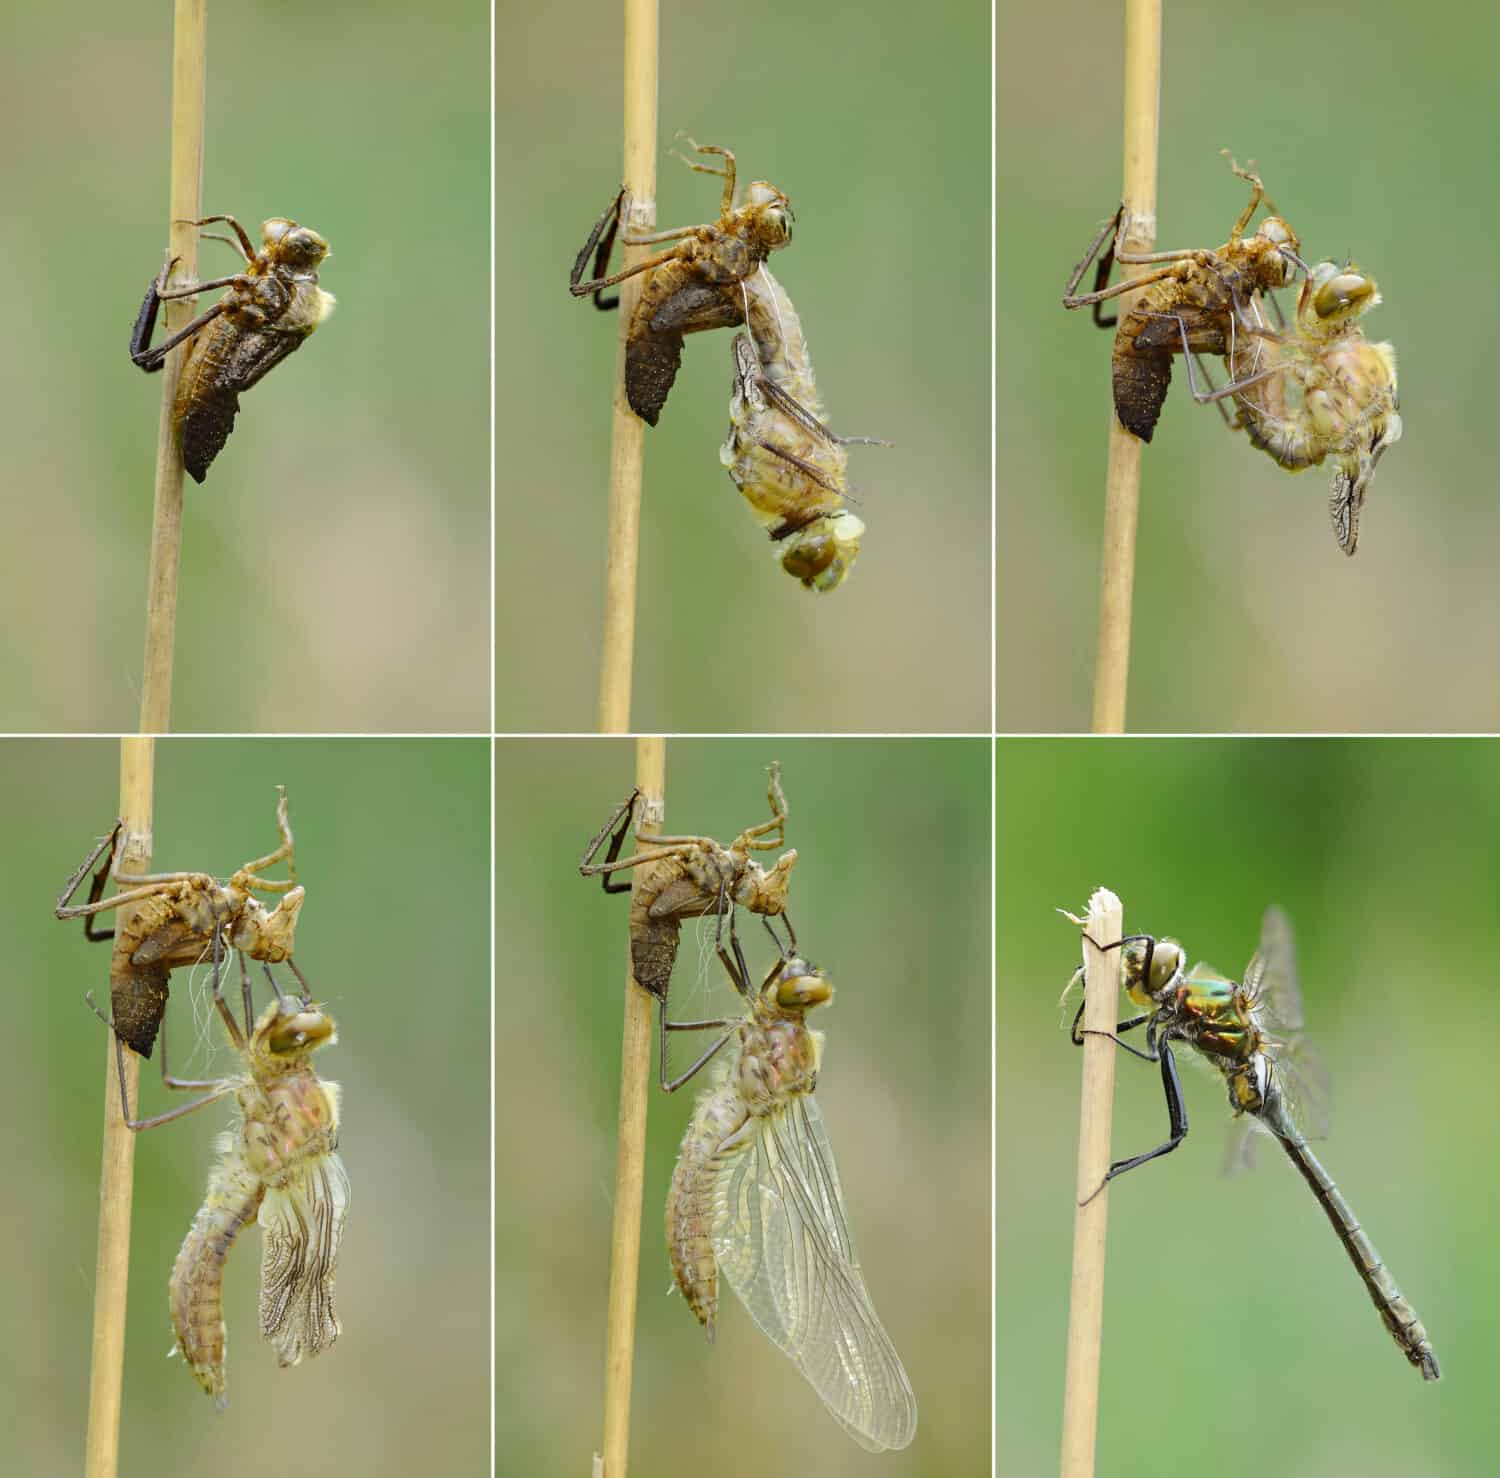 dragonfly metamorphosis sequence from larva to adult, Downy emerald (Cordulia aenea)